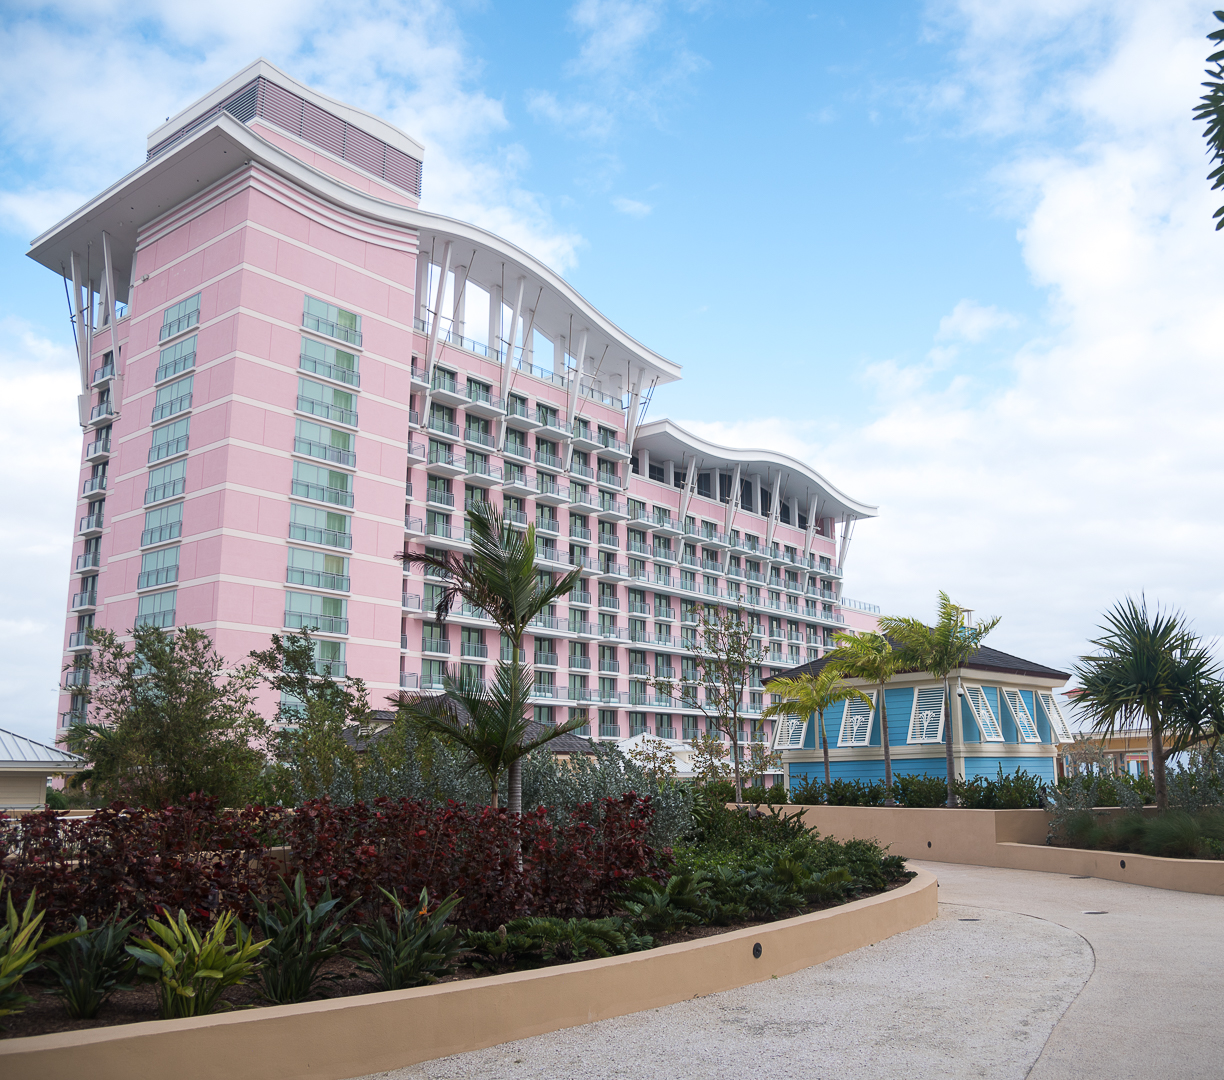 pink hotel in the bahamas - baha mar resort review in the bahamas by popular Chicago travel blogger Visions of Vogue